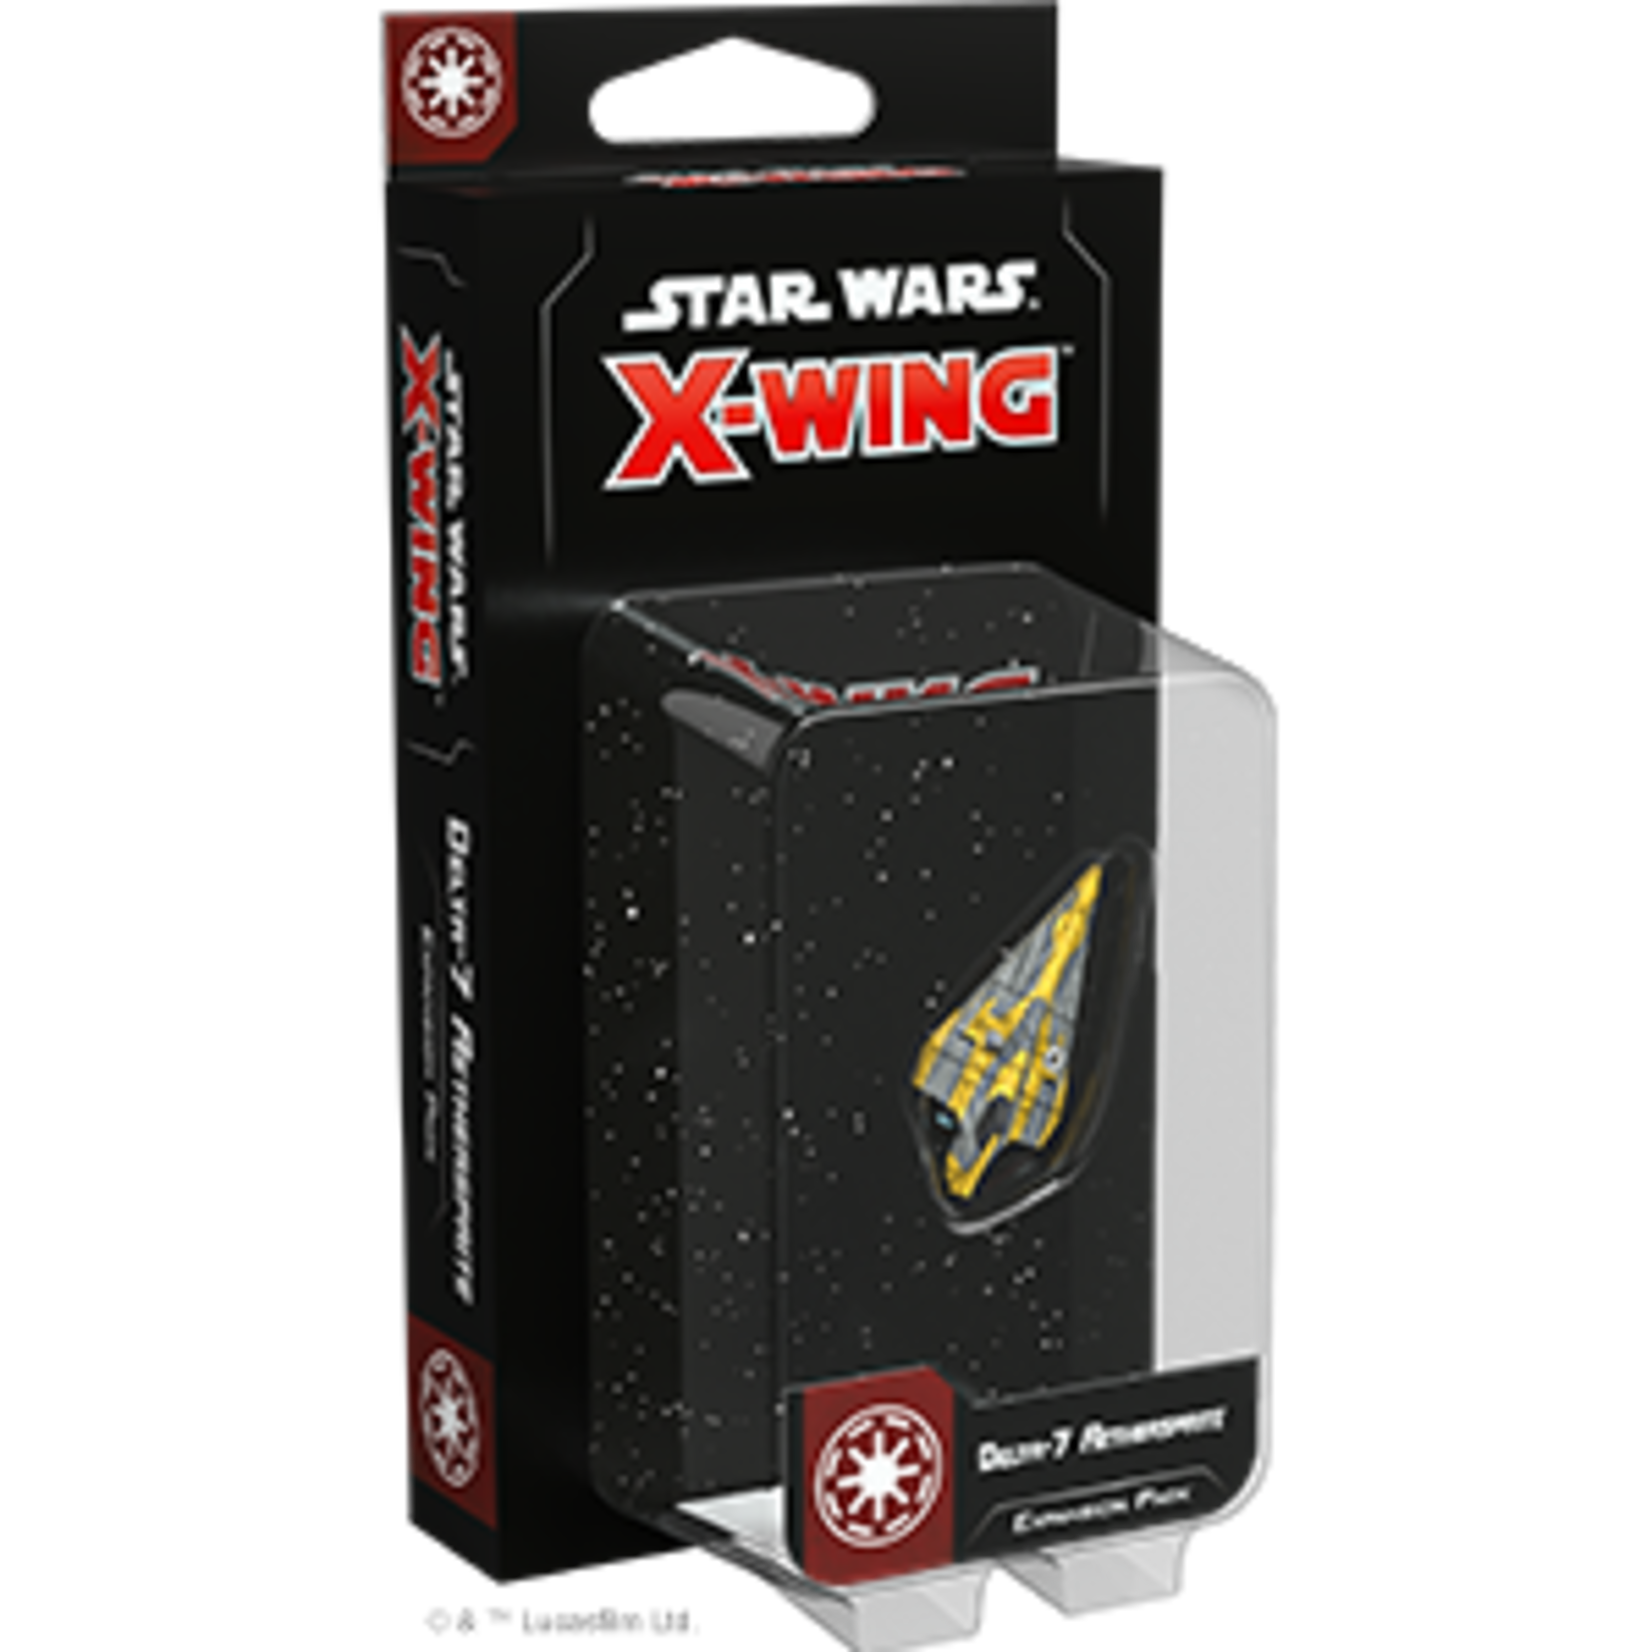 Fantasy Flight Games Star Wars X-Wing: 2nd Edition - Delta-7 Aethersprite Expansion Pack